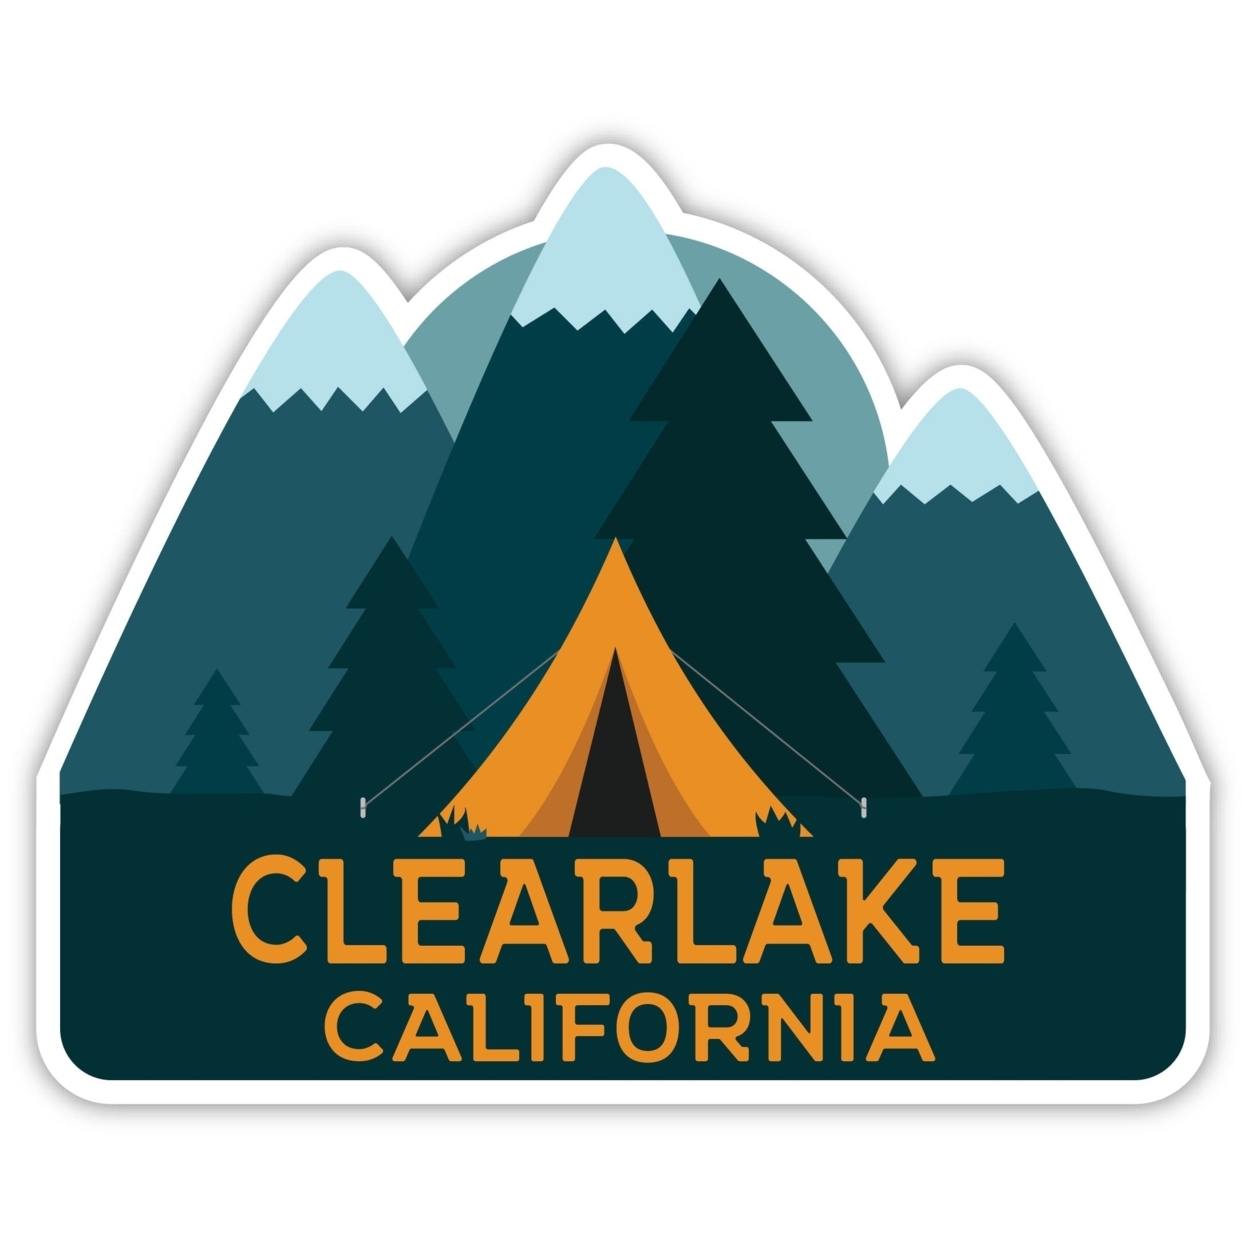 Clearlake California Souvenir Decorative Stickers (Choose Theme And Size) - 4-Pack, 4-Inch, Great Outdoors